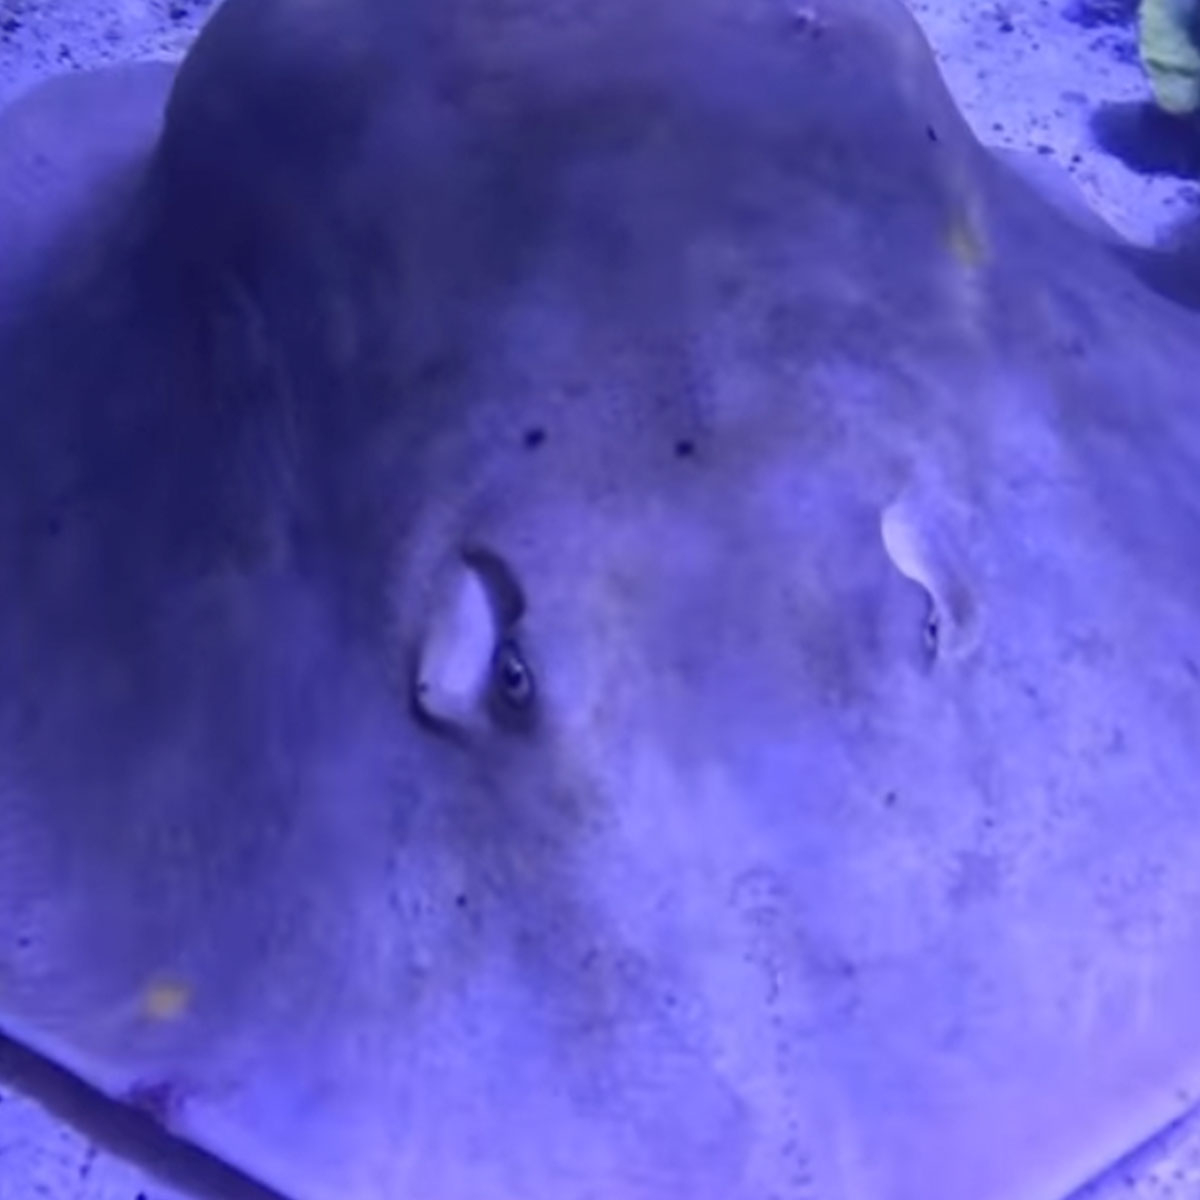 Charlotte the Stingray, of Viral Pregnancy Fame, Is Dead